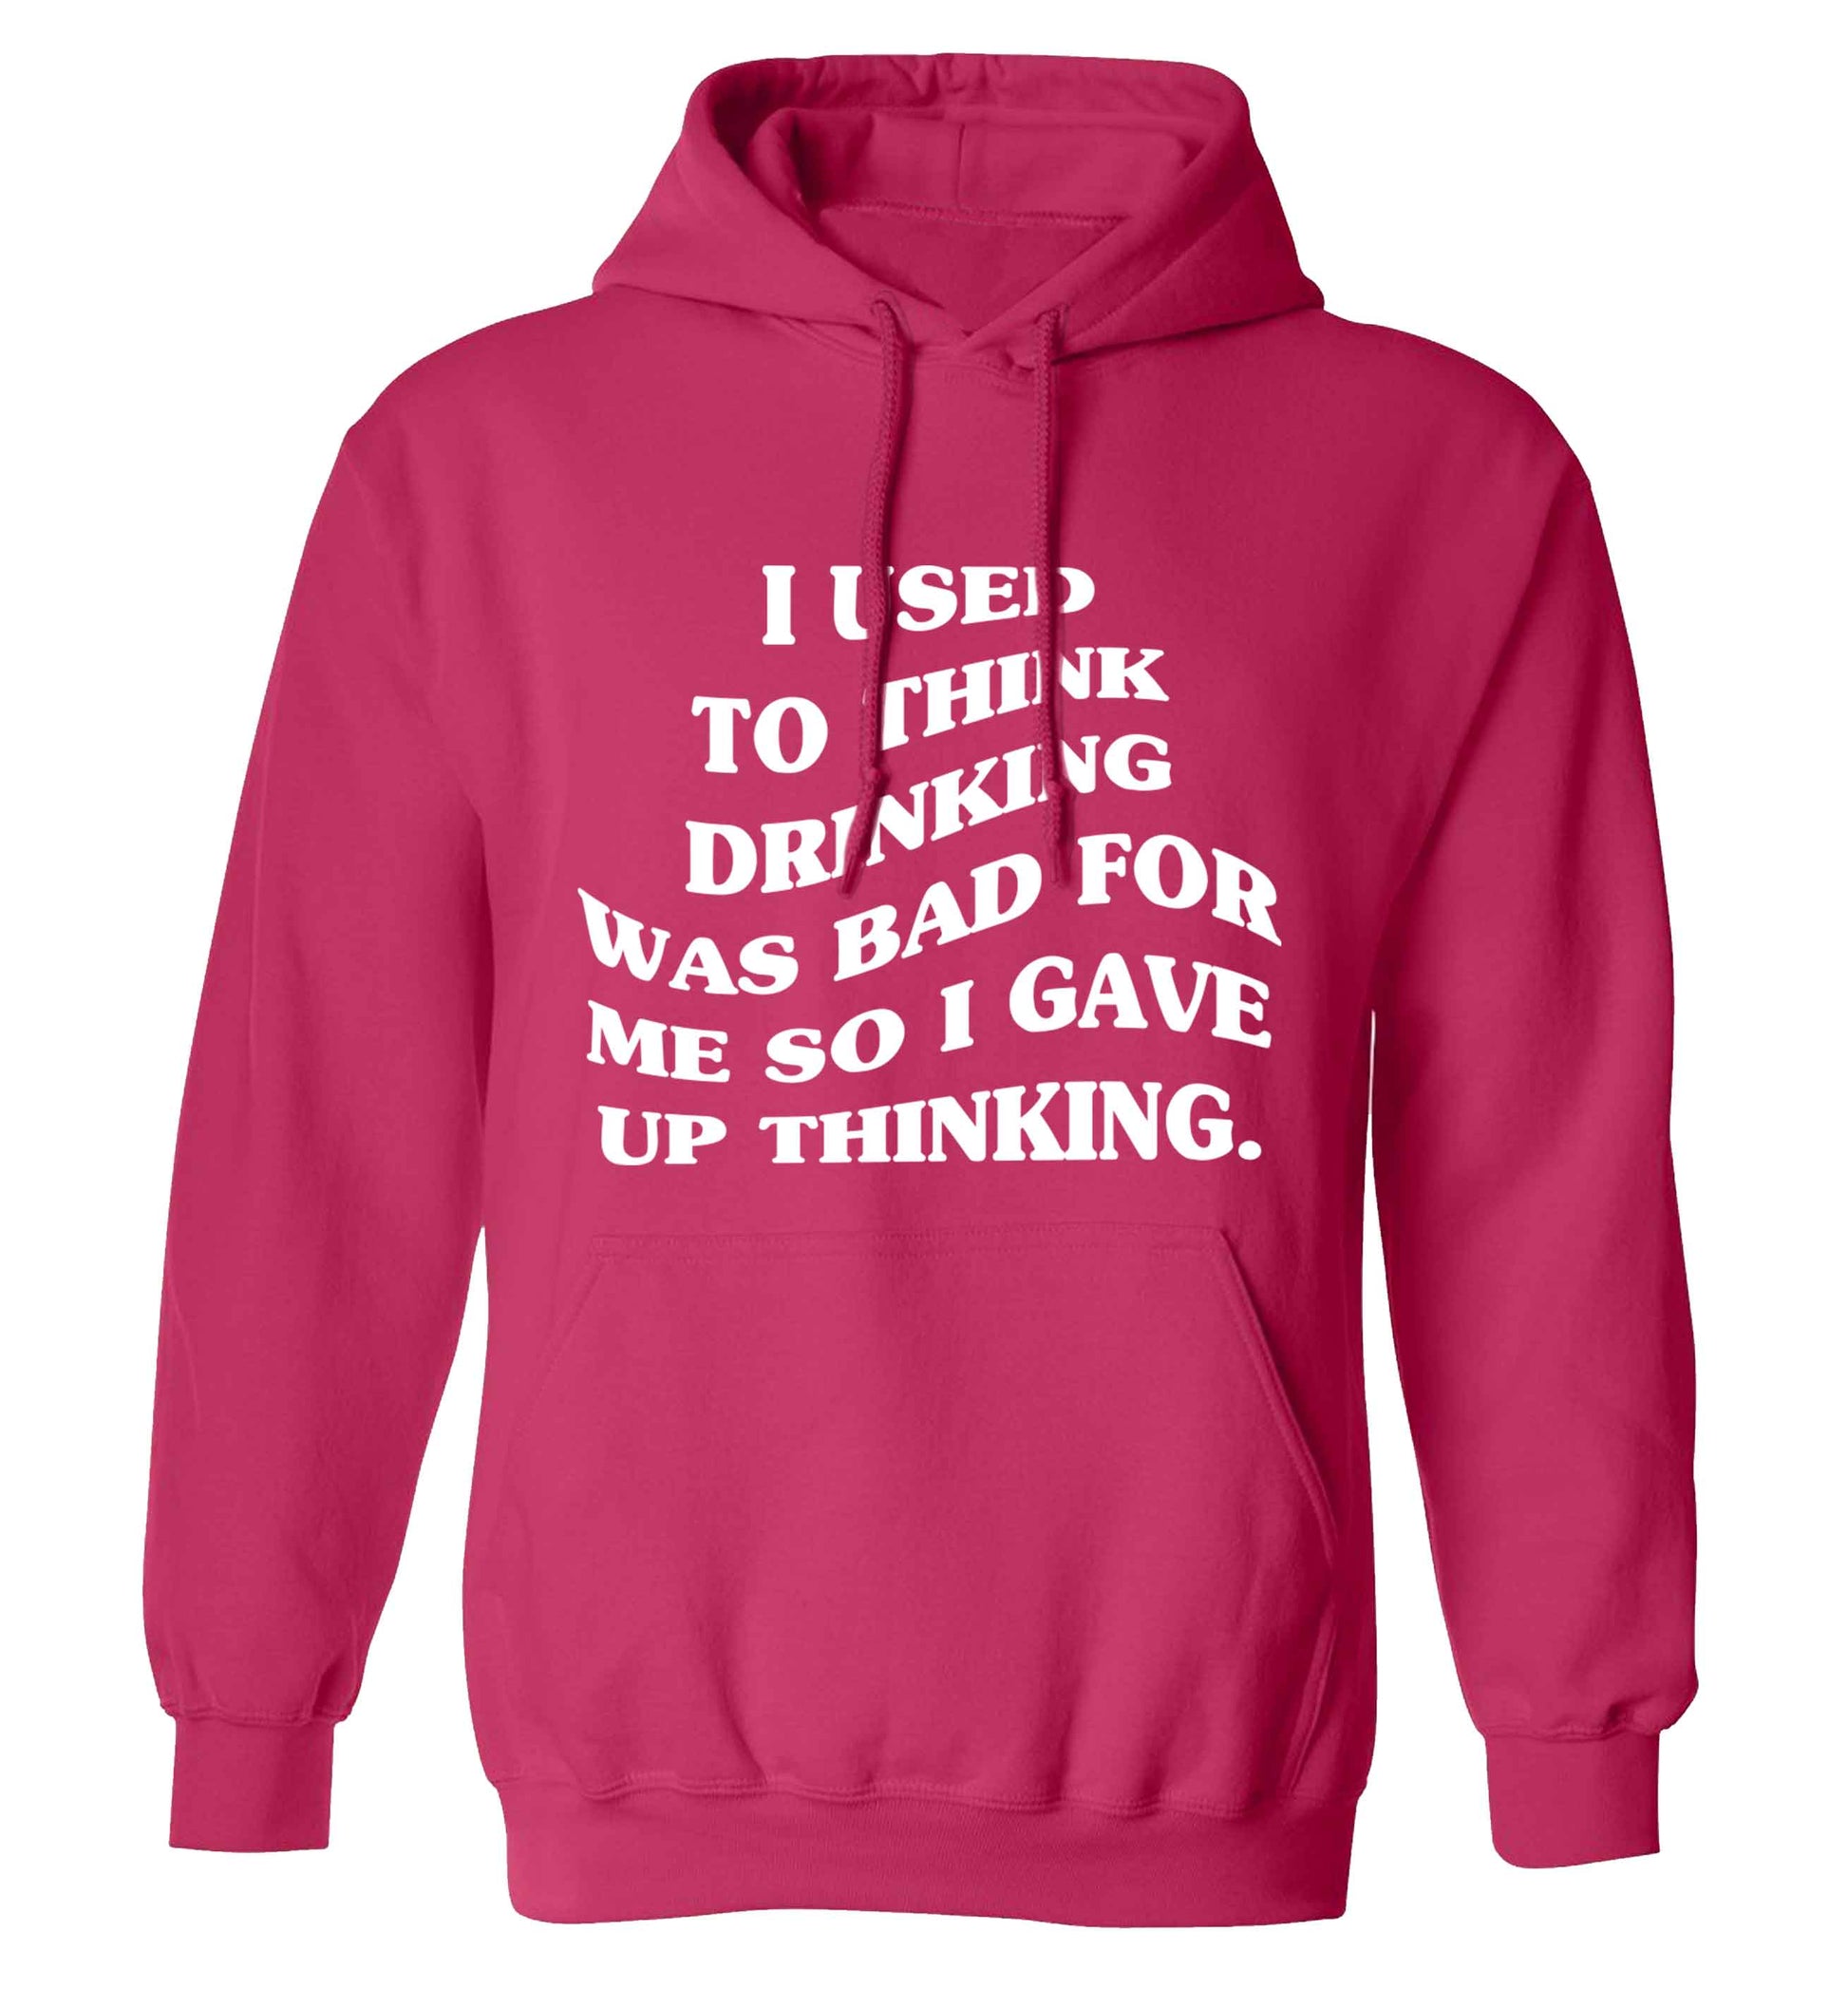 I used to think drinking was bad so I gave up thinking adults unisex pink hoodie 2XL